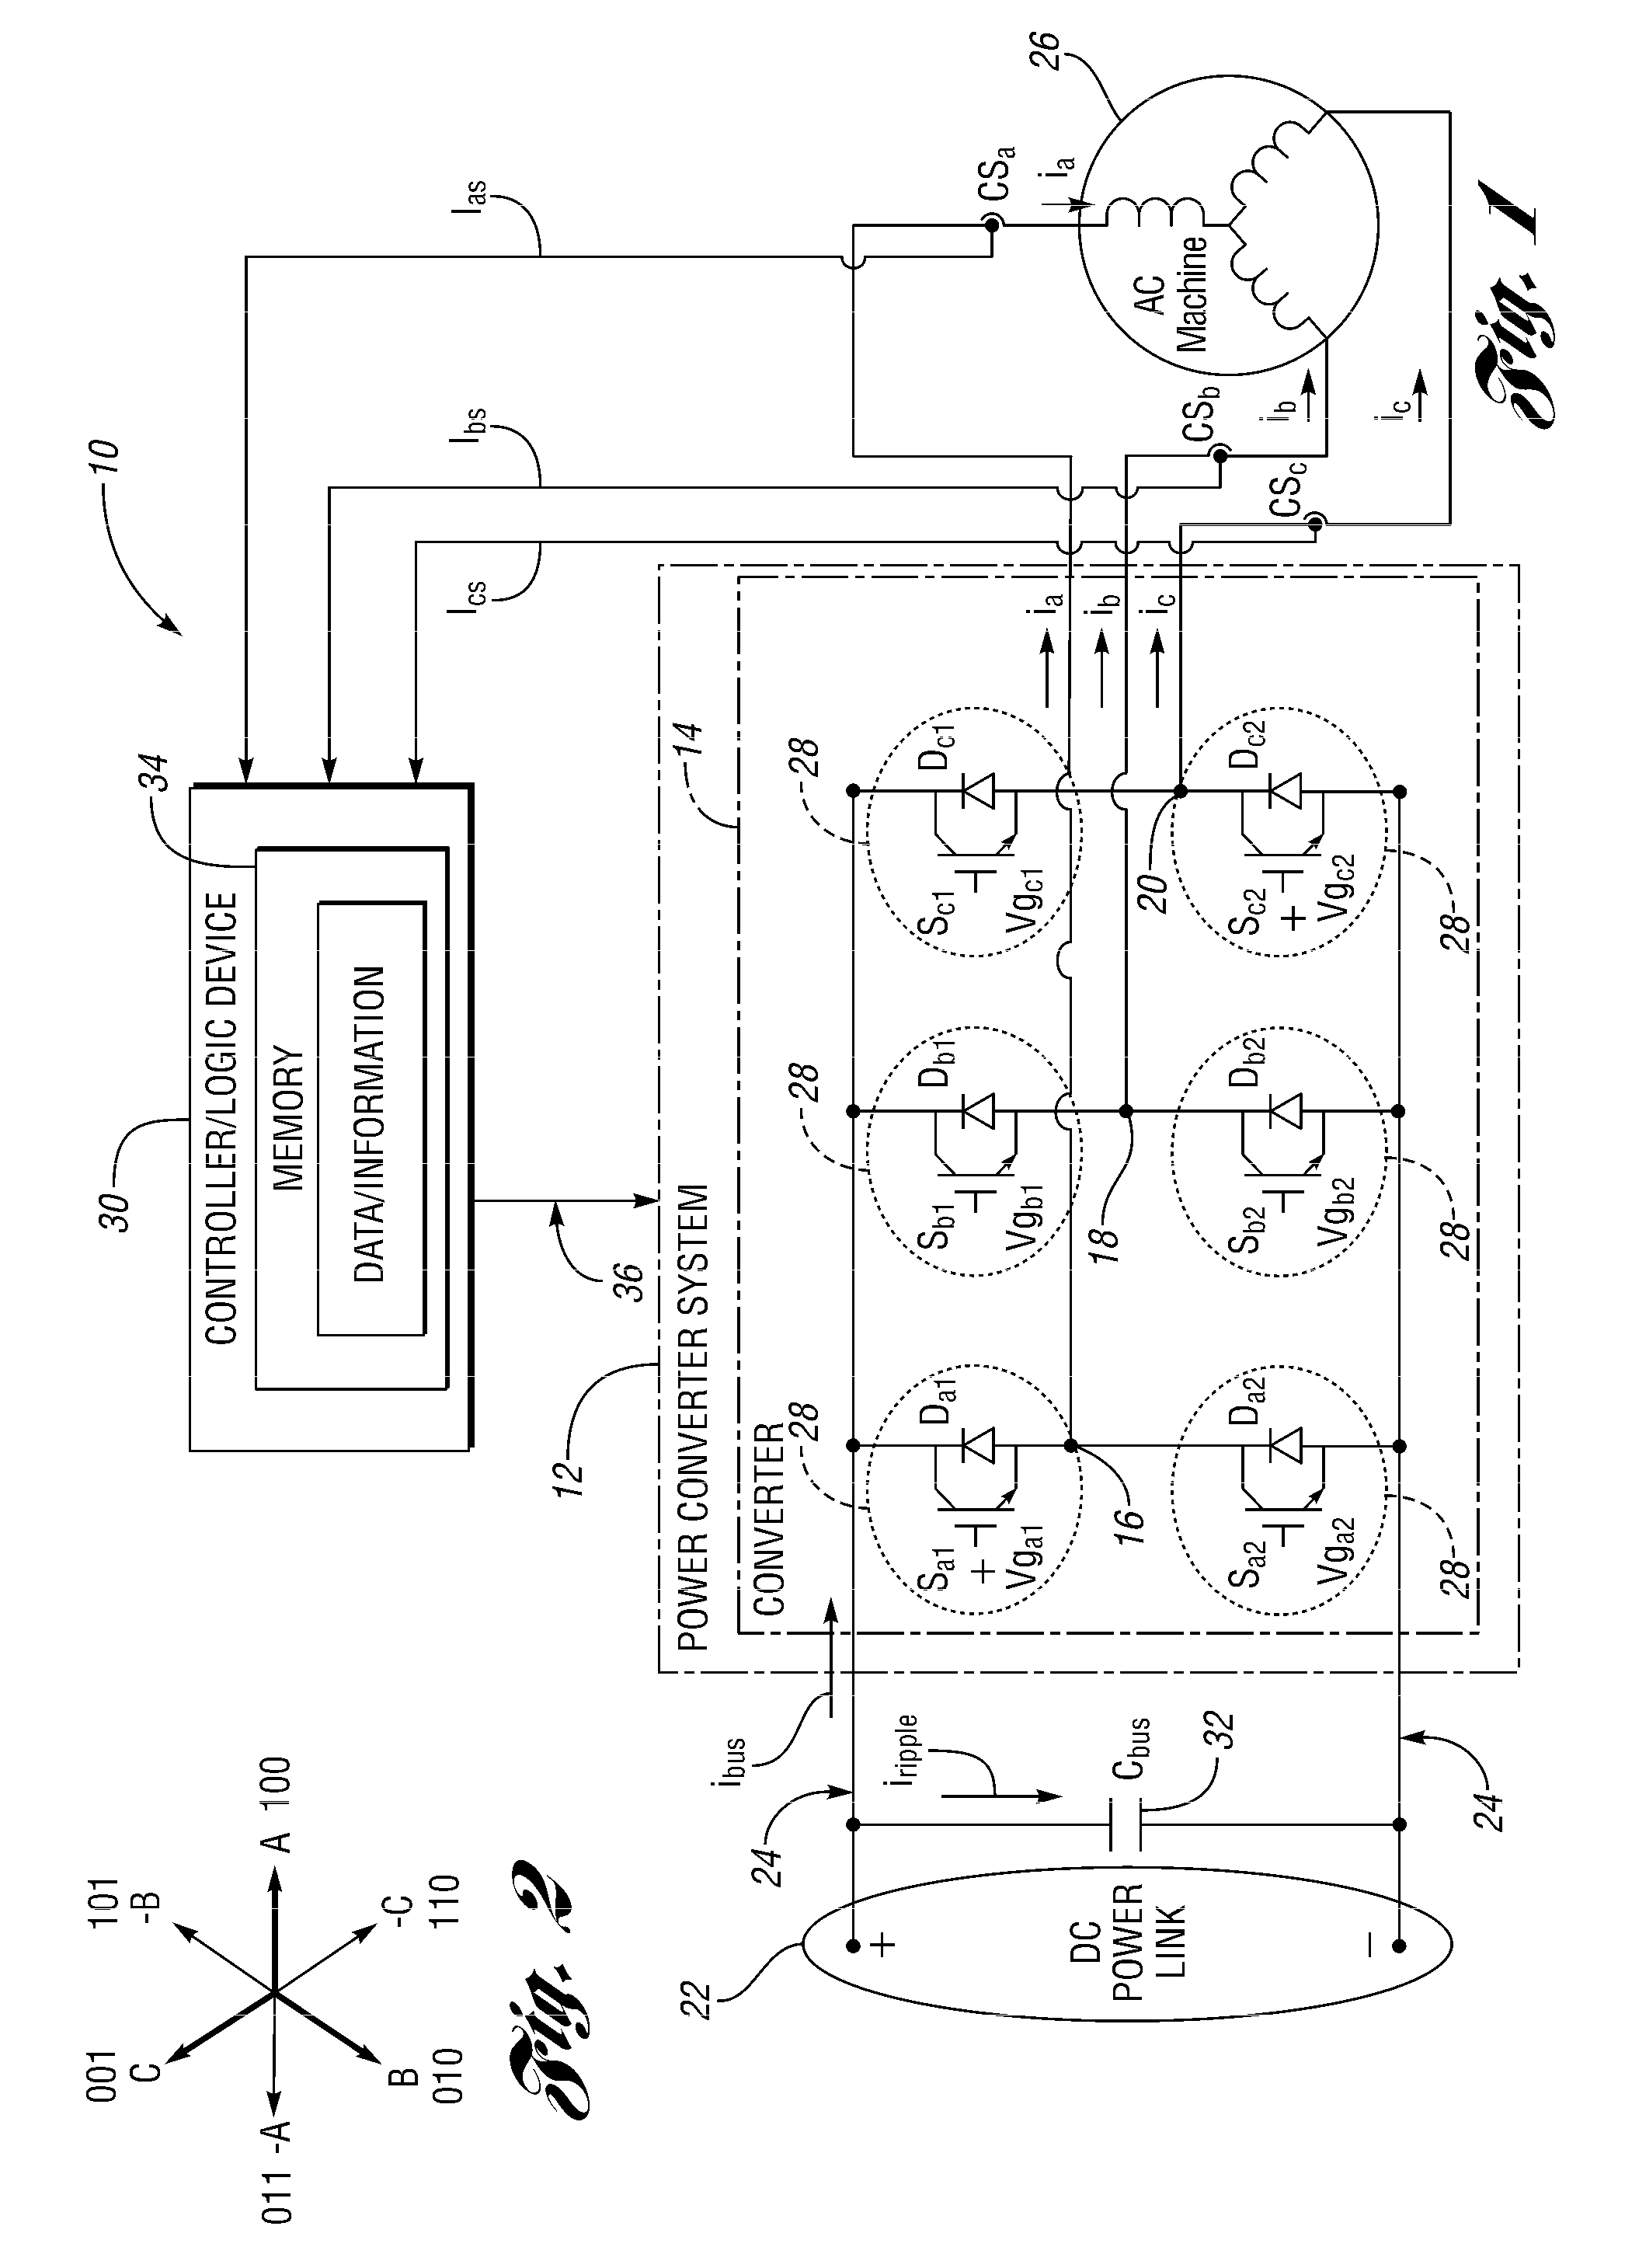 Method And System For Controlling A Power Converter System Connected To A DC-BUS Capacitor